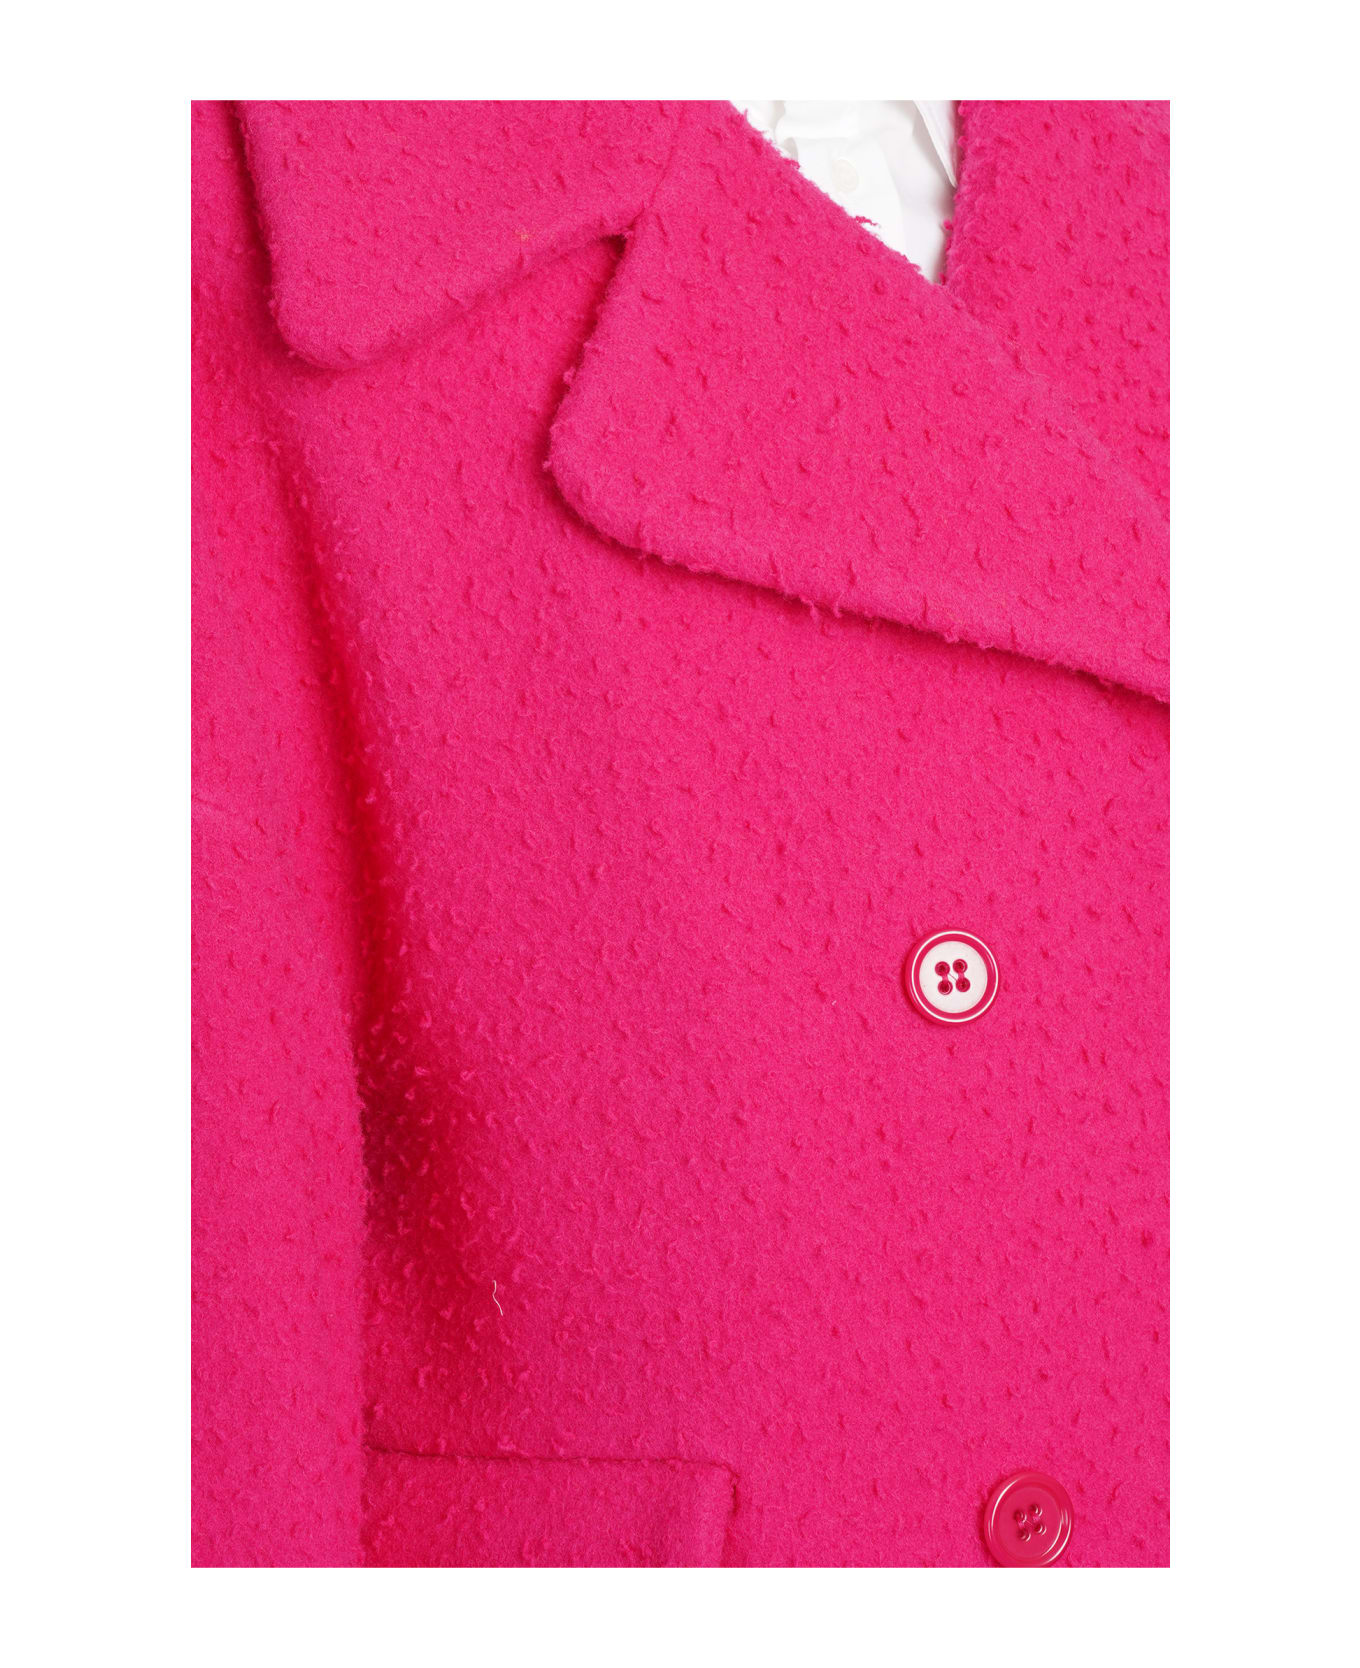 RED Valentino Coat In Fuxia Wool - fuxia